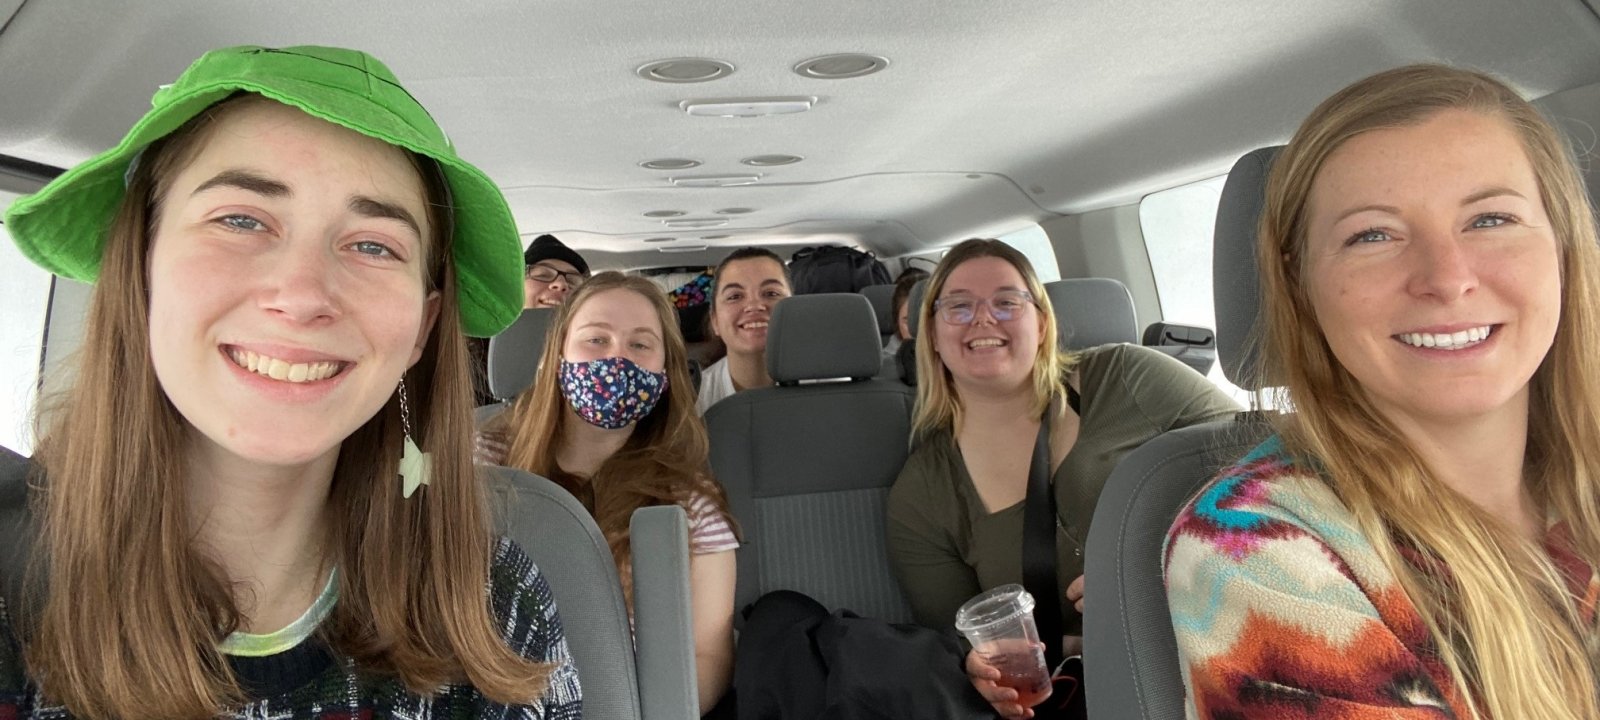 The group smiles as they ride in the van on the way to One Heartland